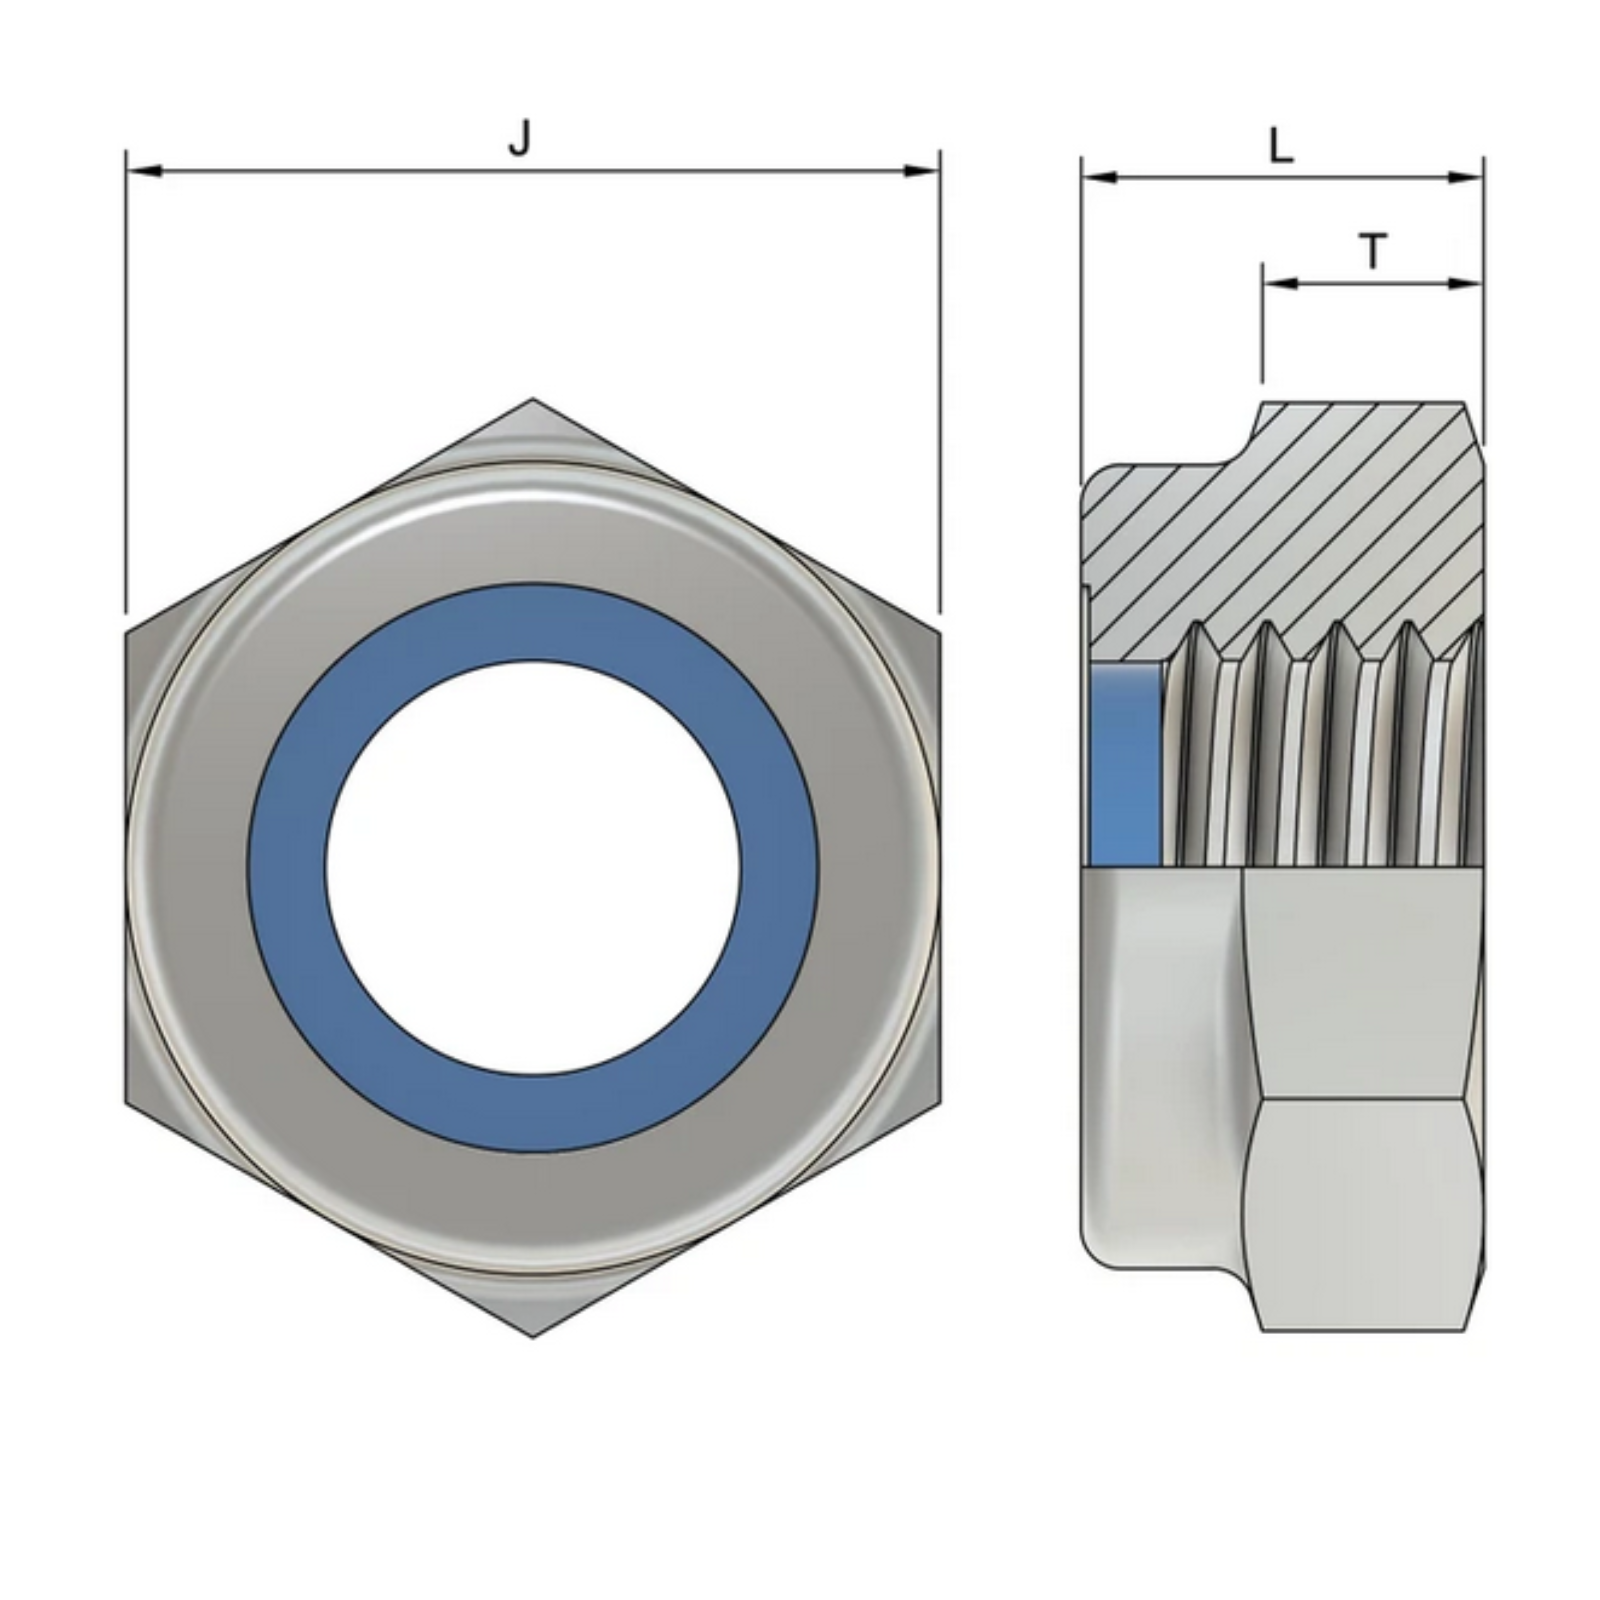 M10 Hexagon Nylon Locking Nuts (DIN 985) - Stainless Steel (A4)